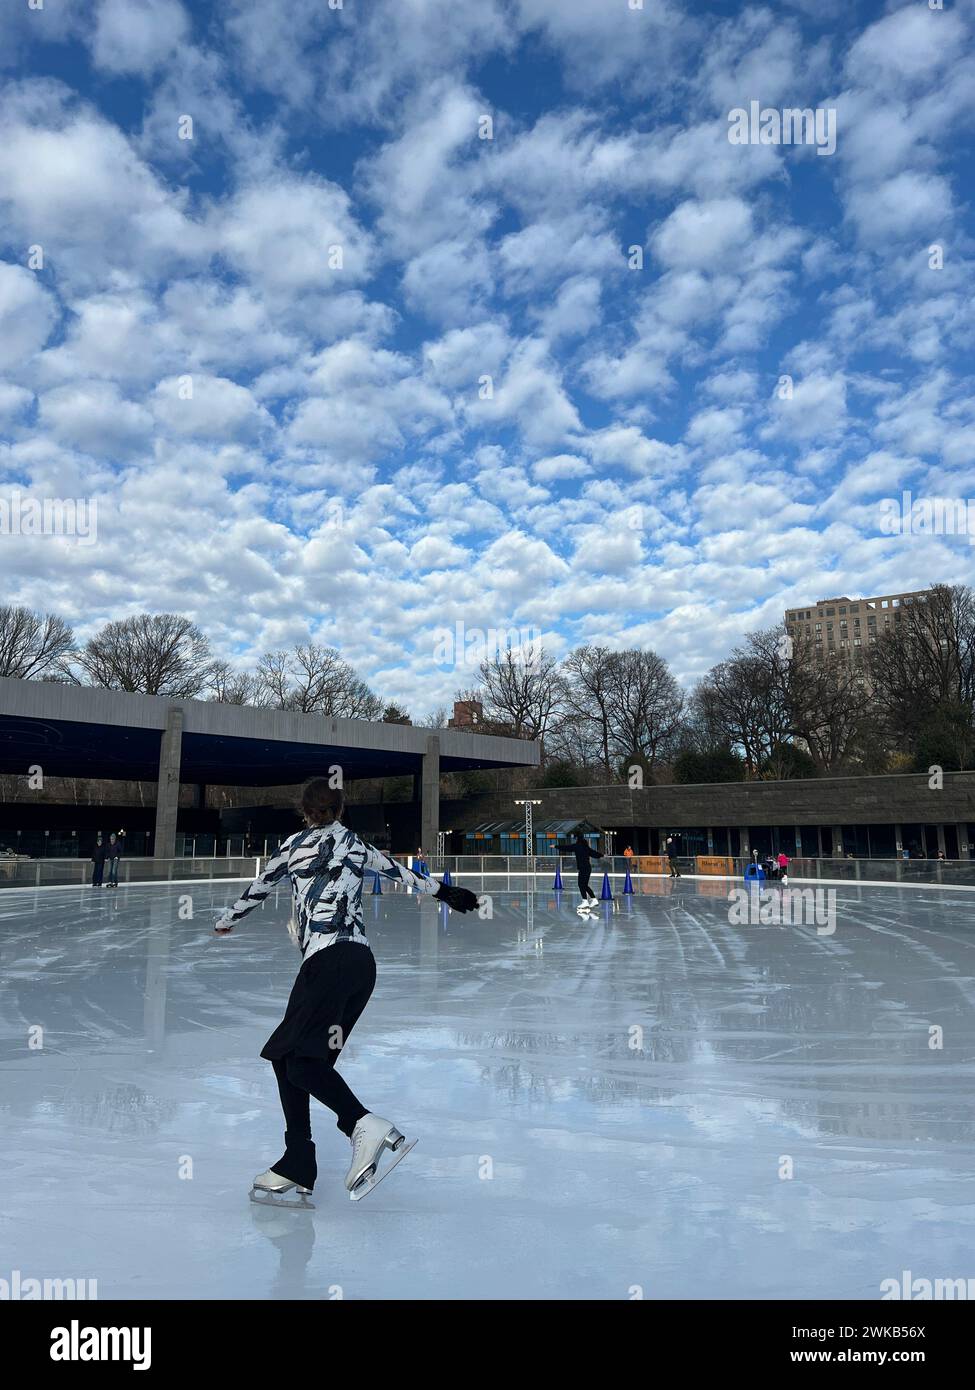 Ice Skaters under a dramatic sky at the rink in Prospect Park, Brooklyn, New York. Stock Photo